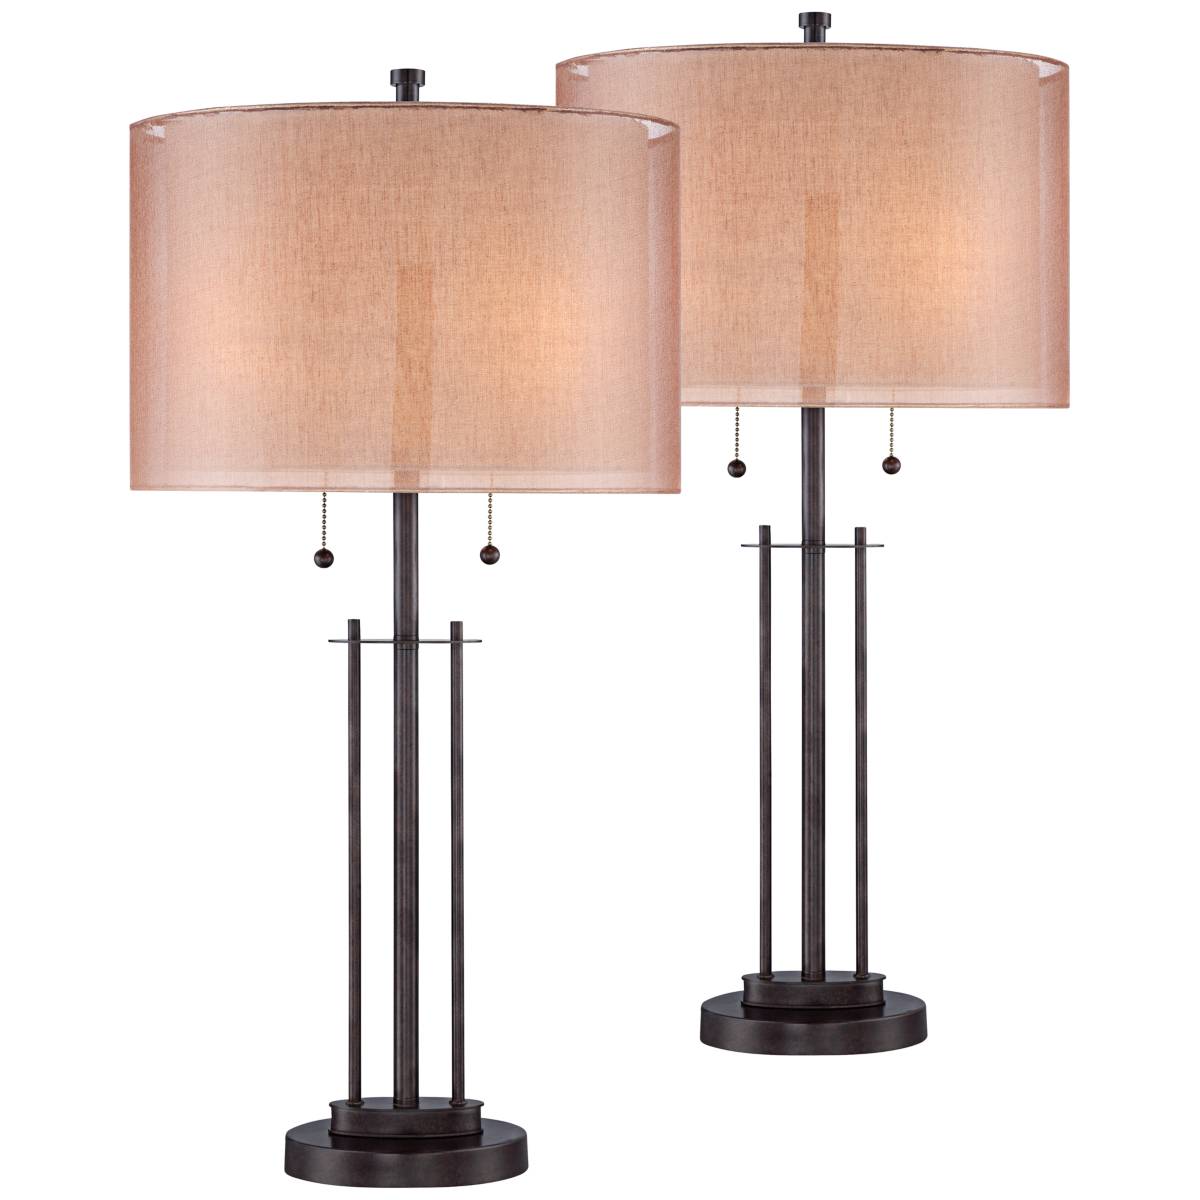 Table Lamps - Designer Styles & Best Selection - Page 16 | Lamps Plus